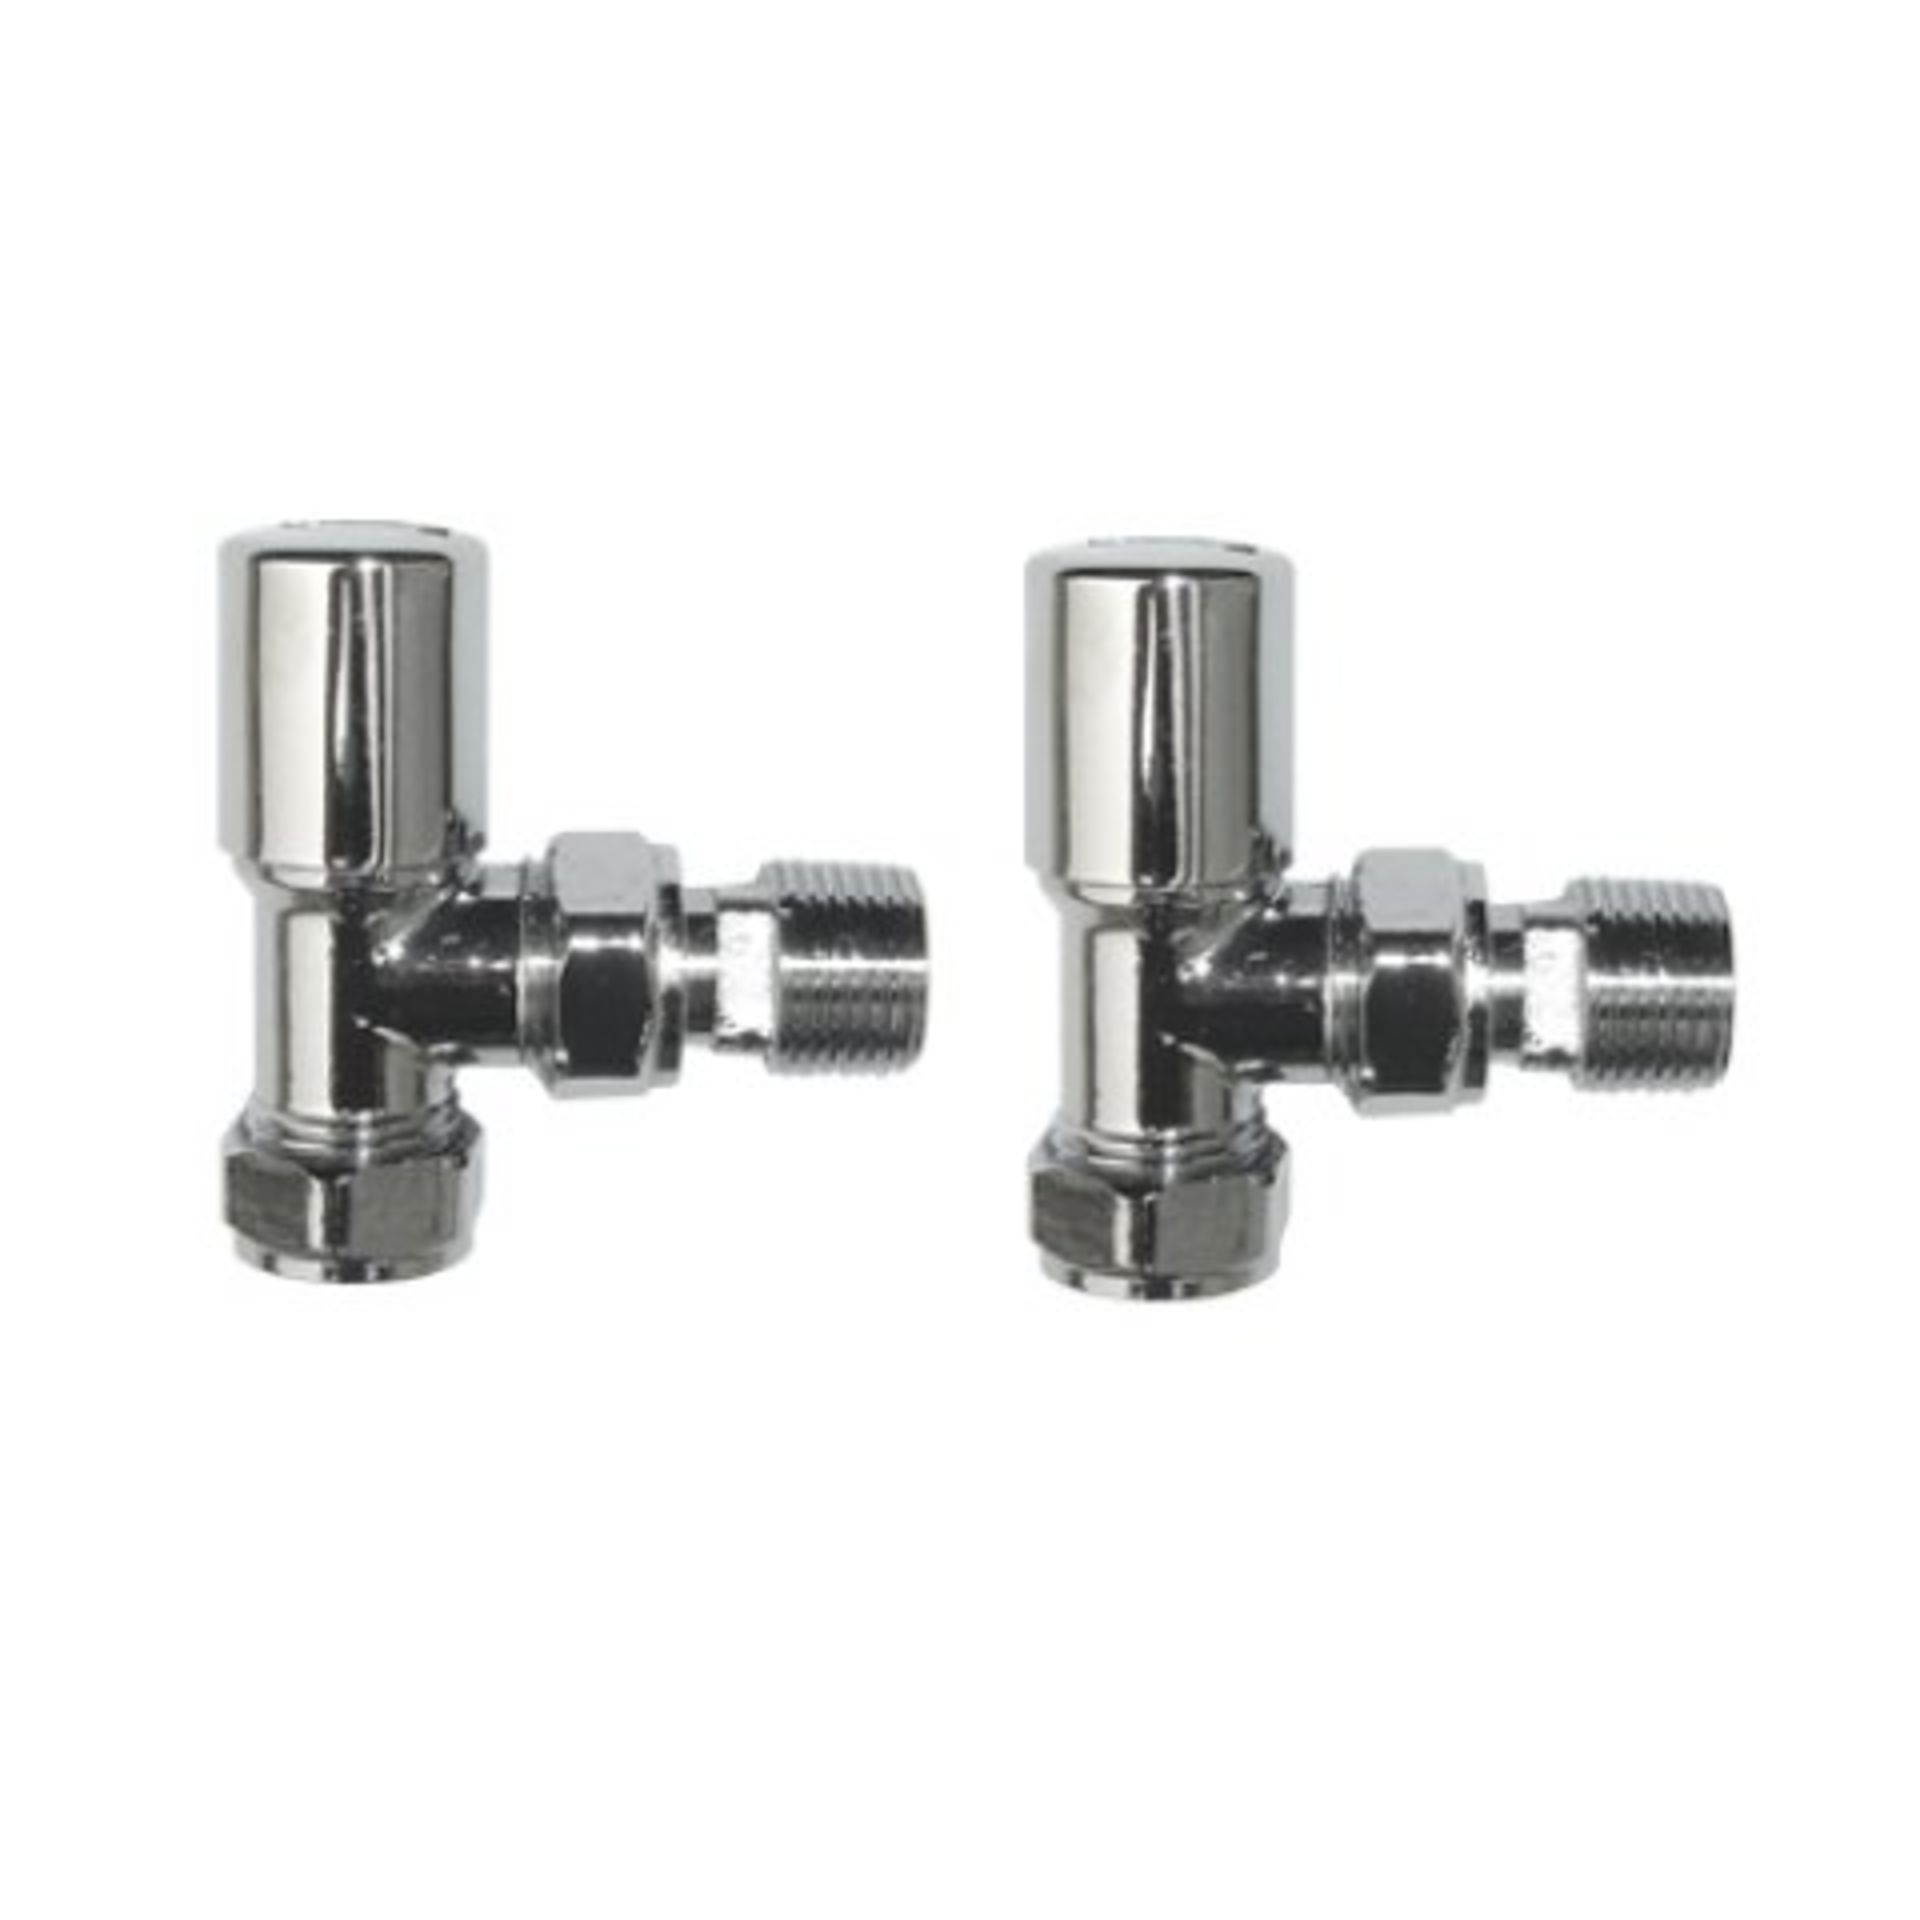 (M165) Standard 15mm Connection Angled Chrome Radiator Valves Made of solid brass, our Angled